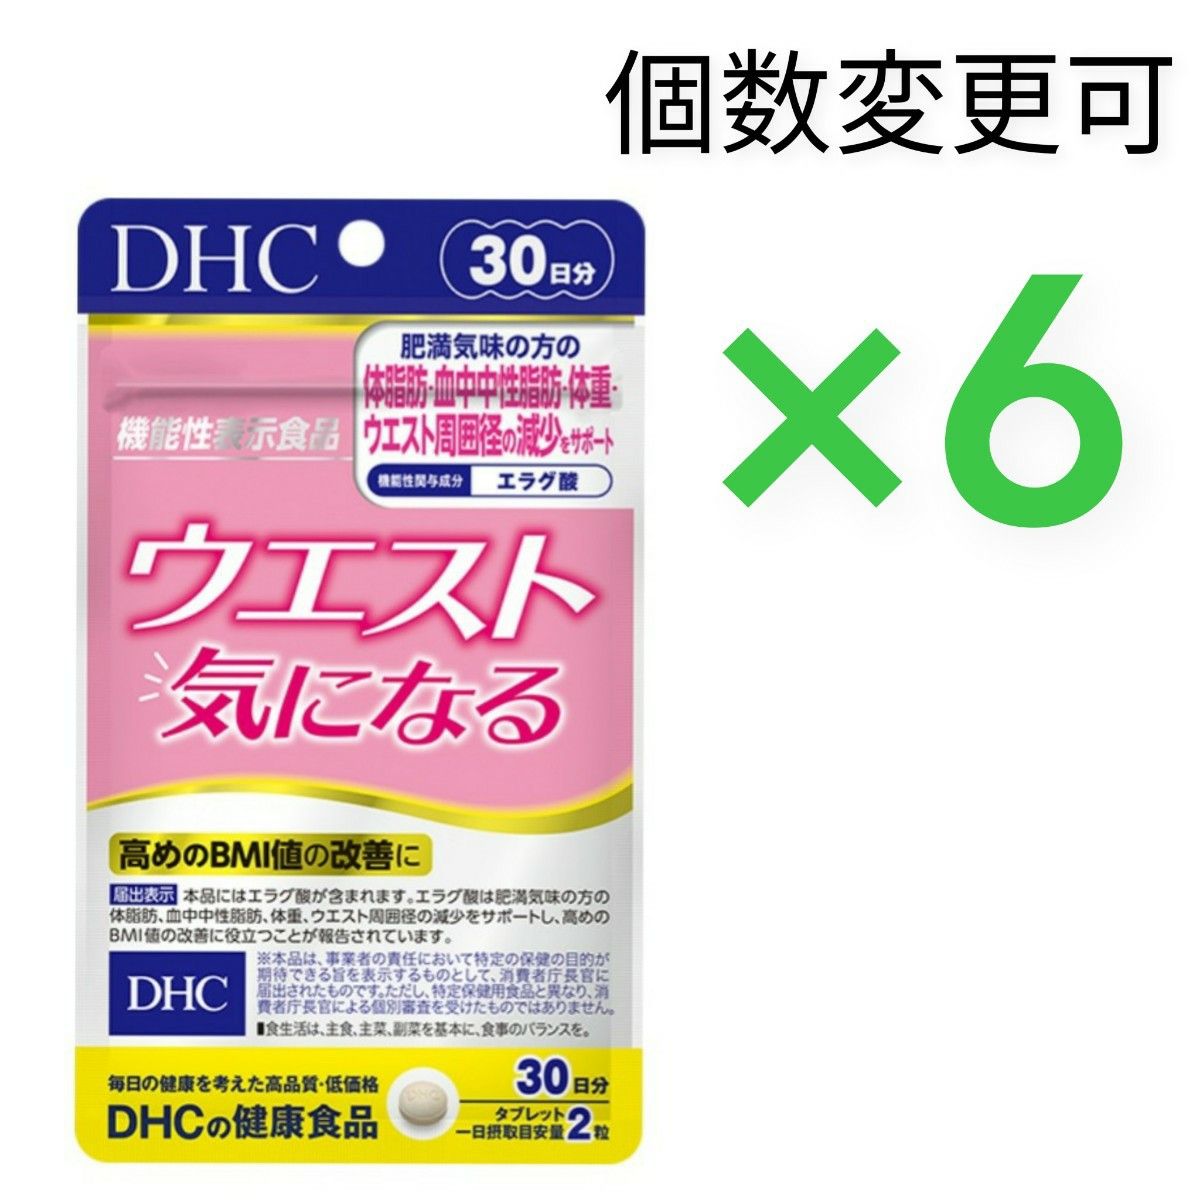 DHC　ウエスト気になる30日分×6袋　個数変更可